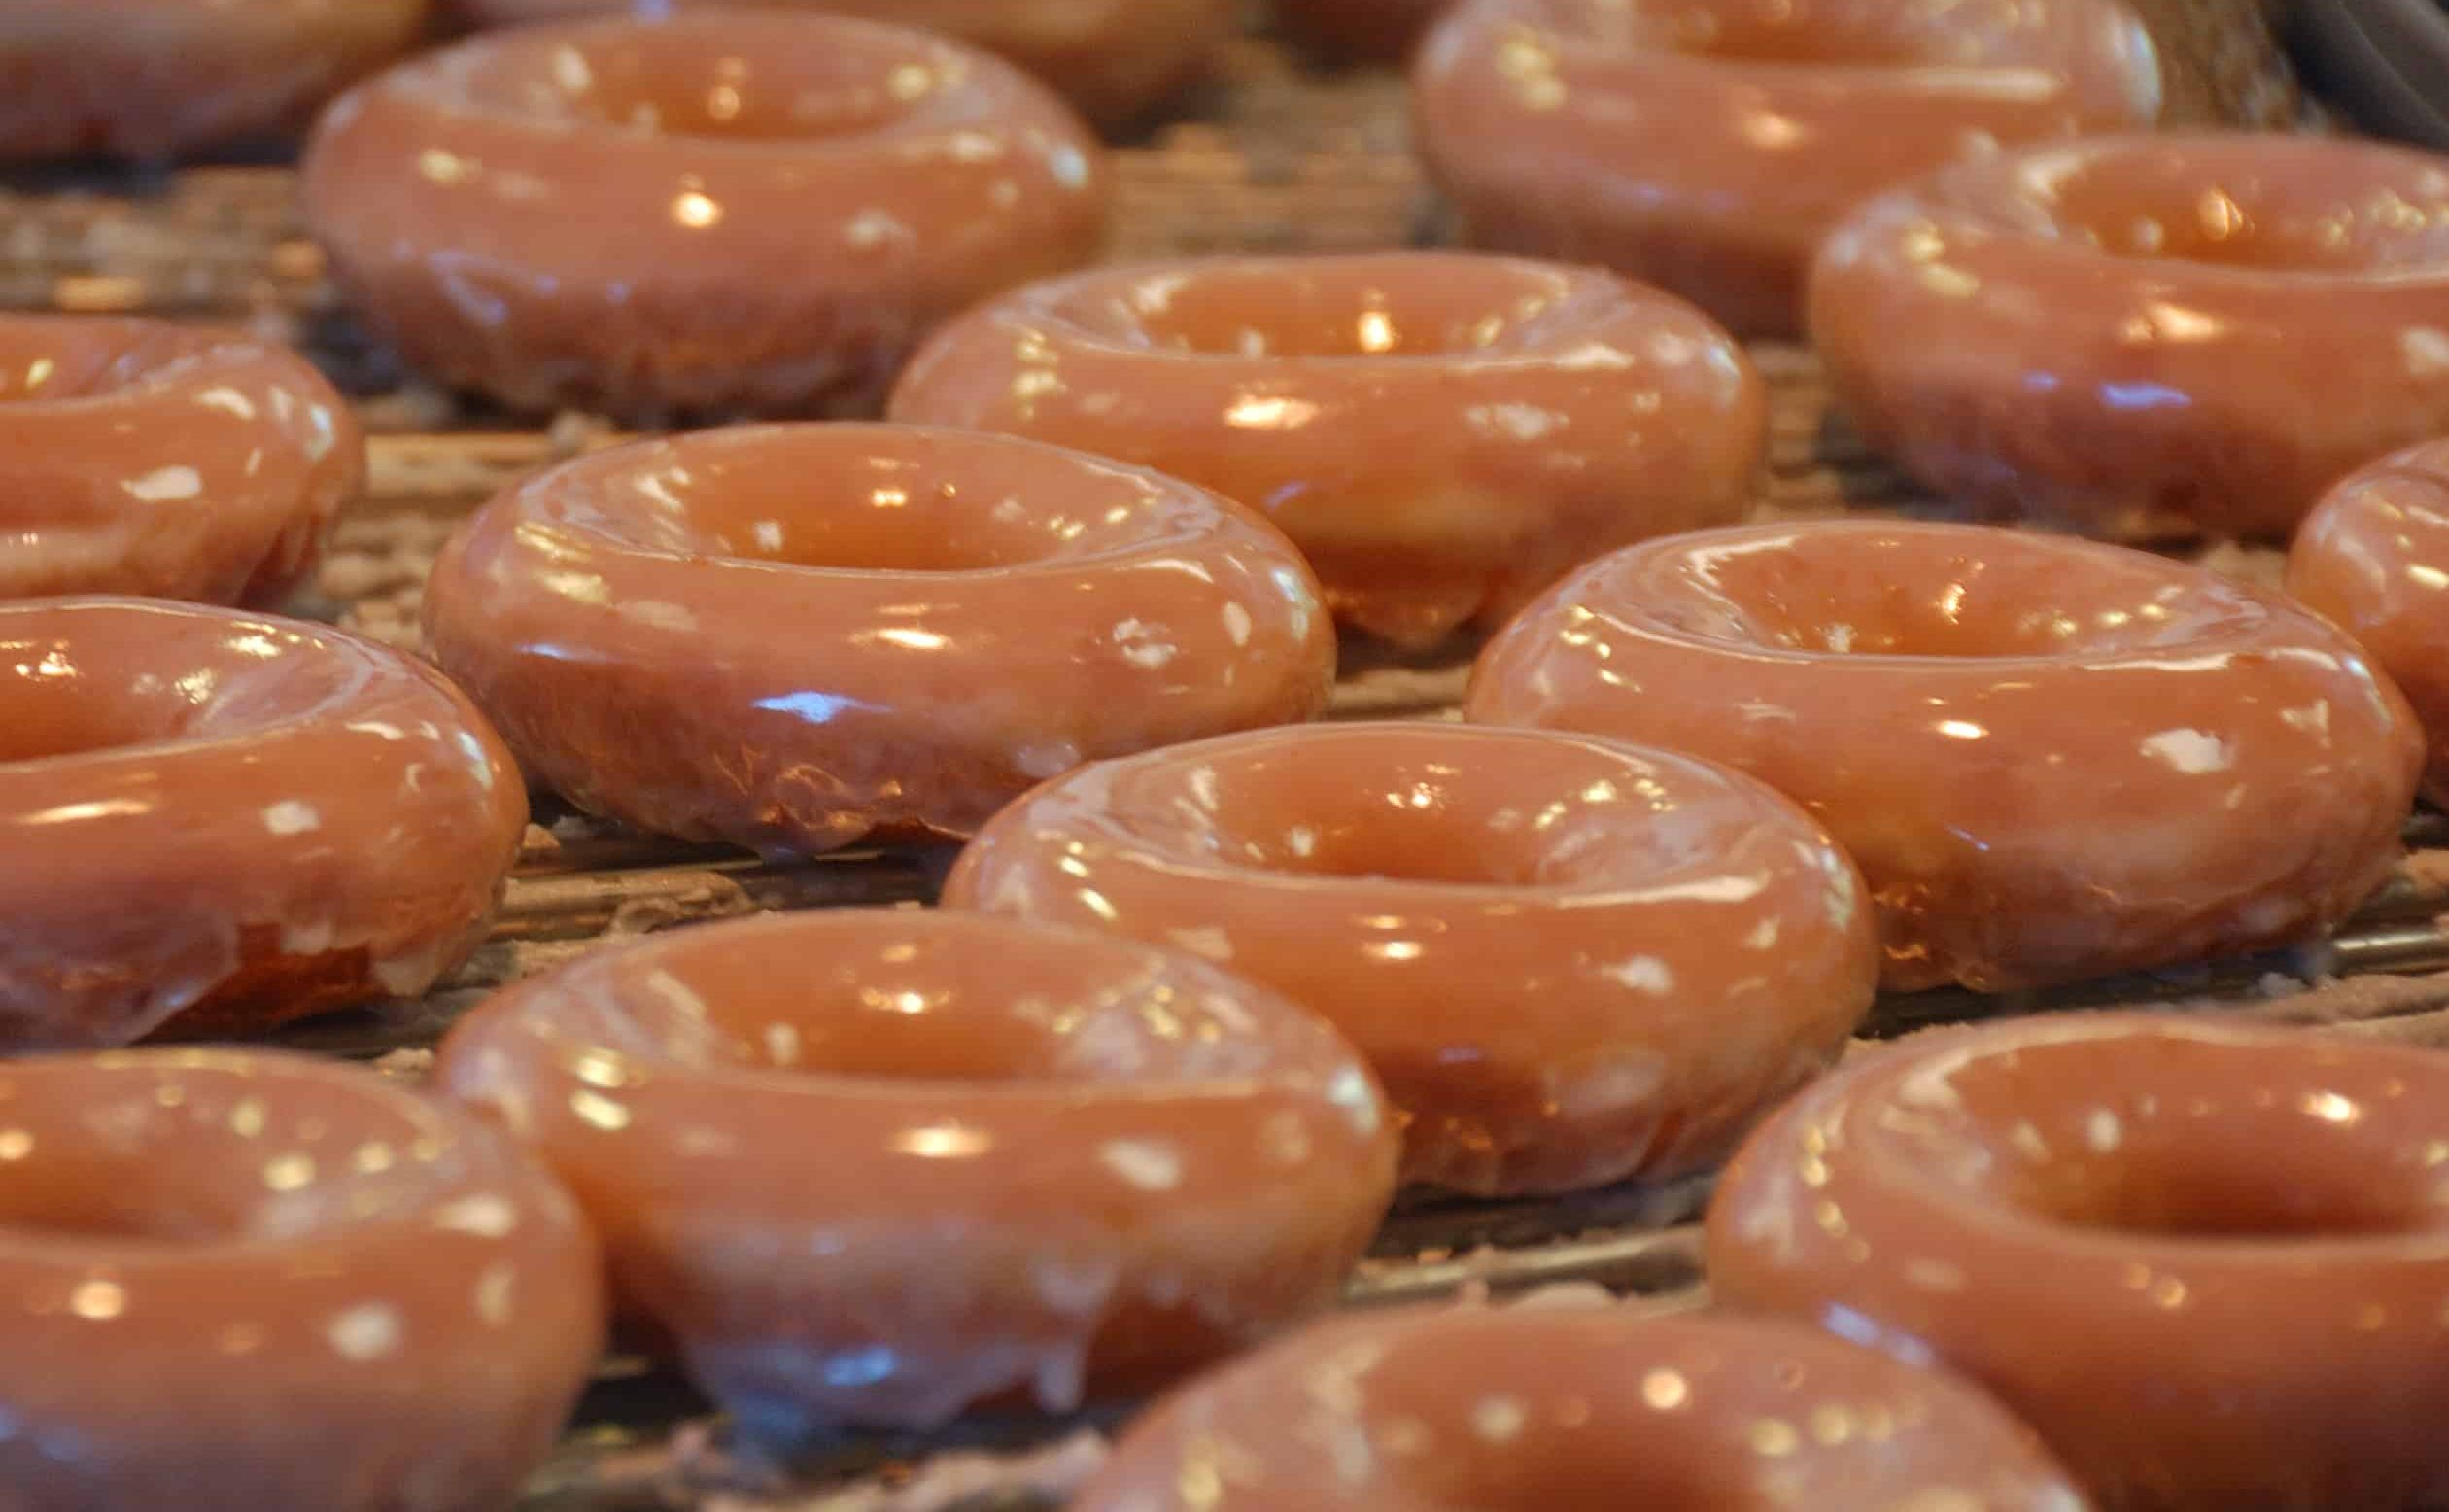 Krispy Kreme in Mississauga make more doughnuts then any other donut shop in the world